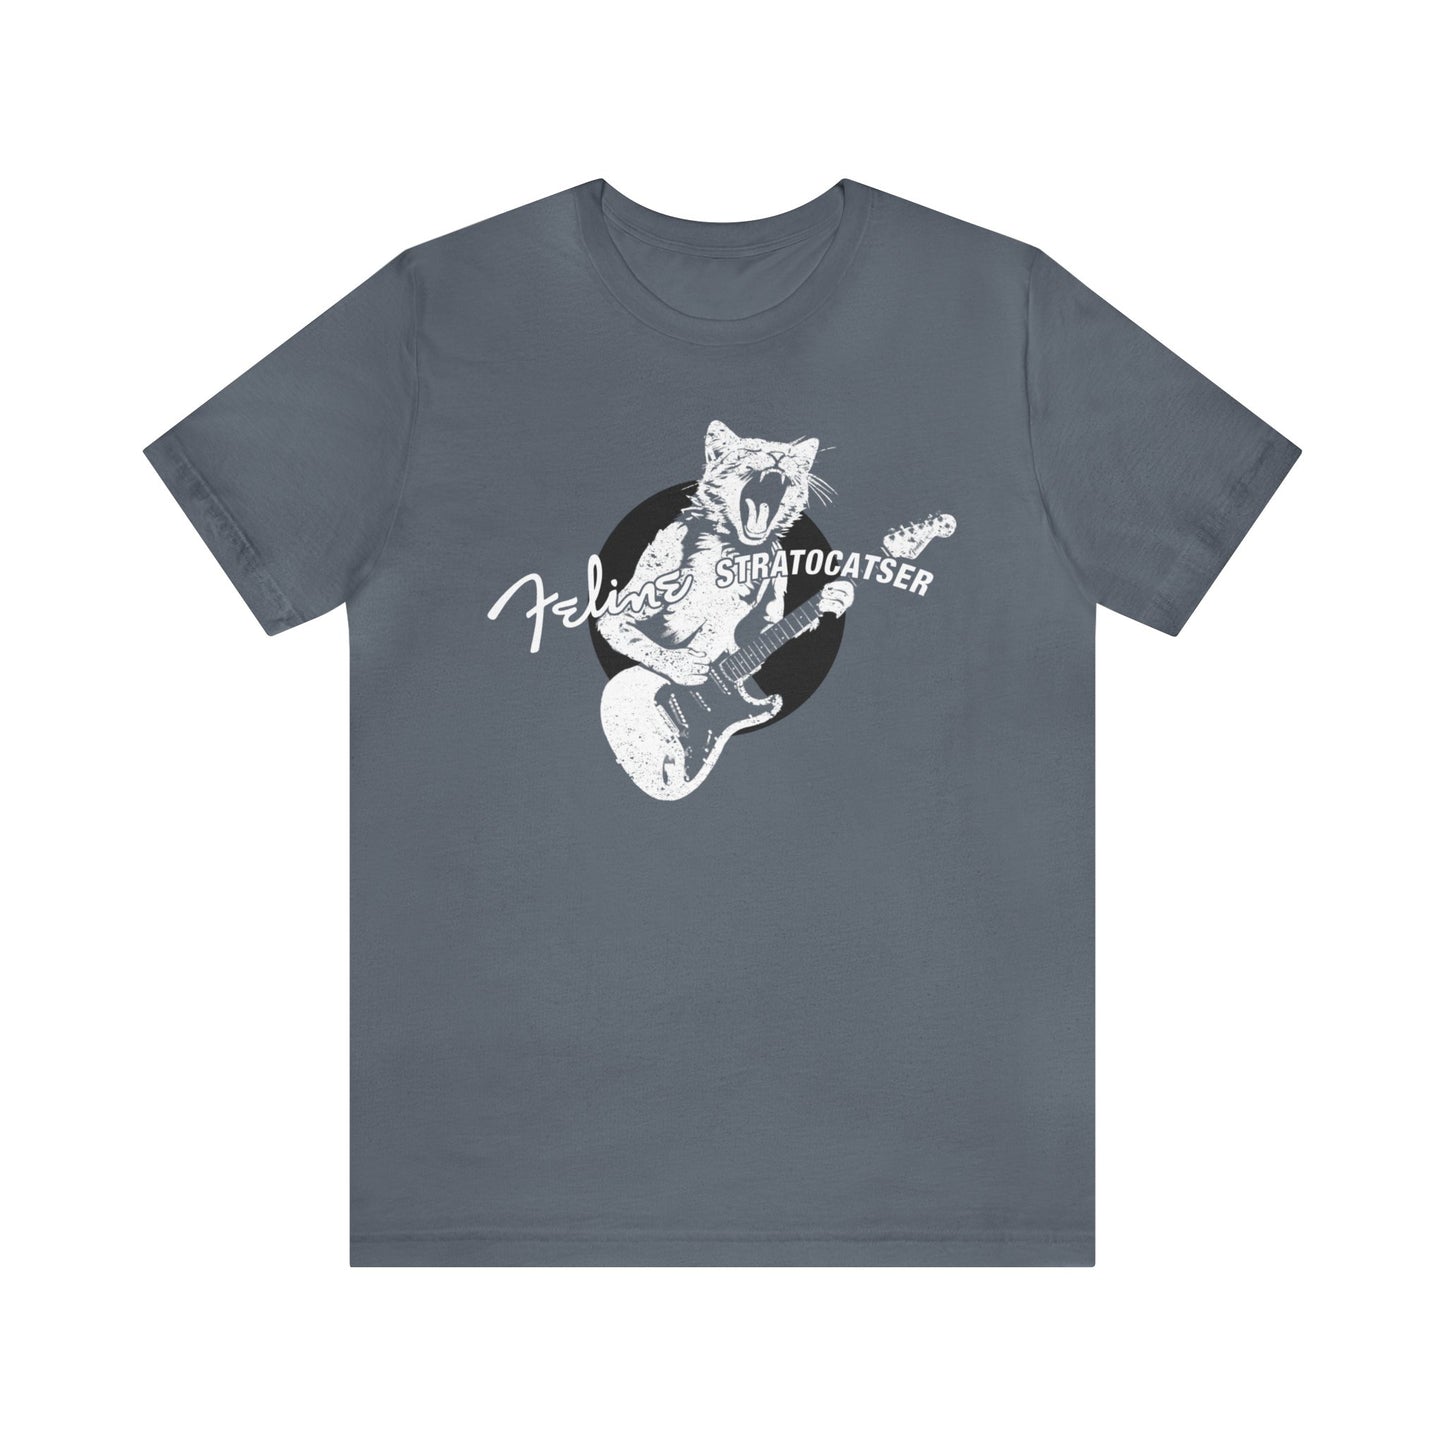 Guitar Cat T-shirt, Funny Gift for Guitar players, Feline Stratocatser, Musician Gift, Bella+Canvas 3001 Tee